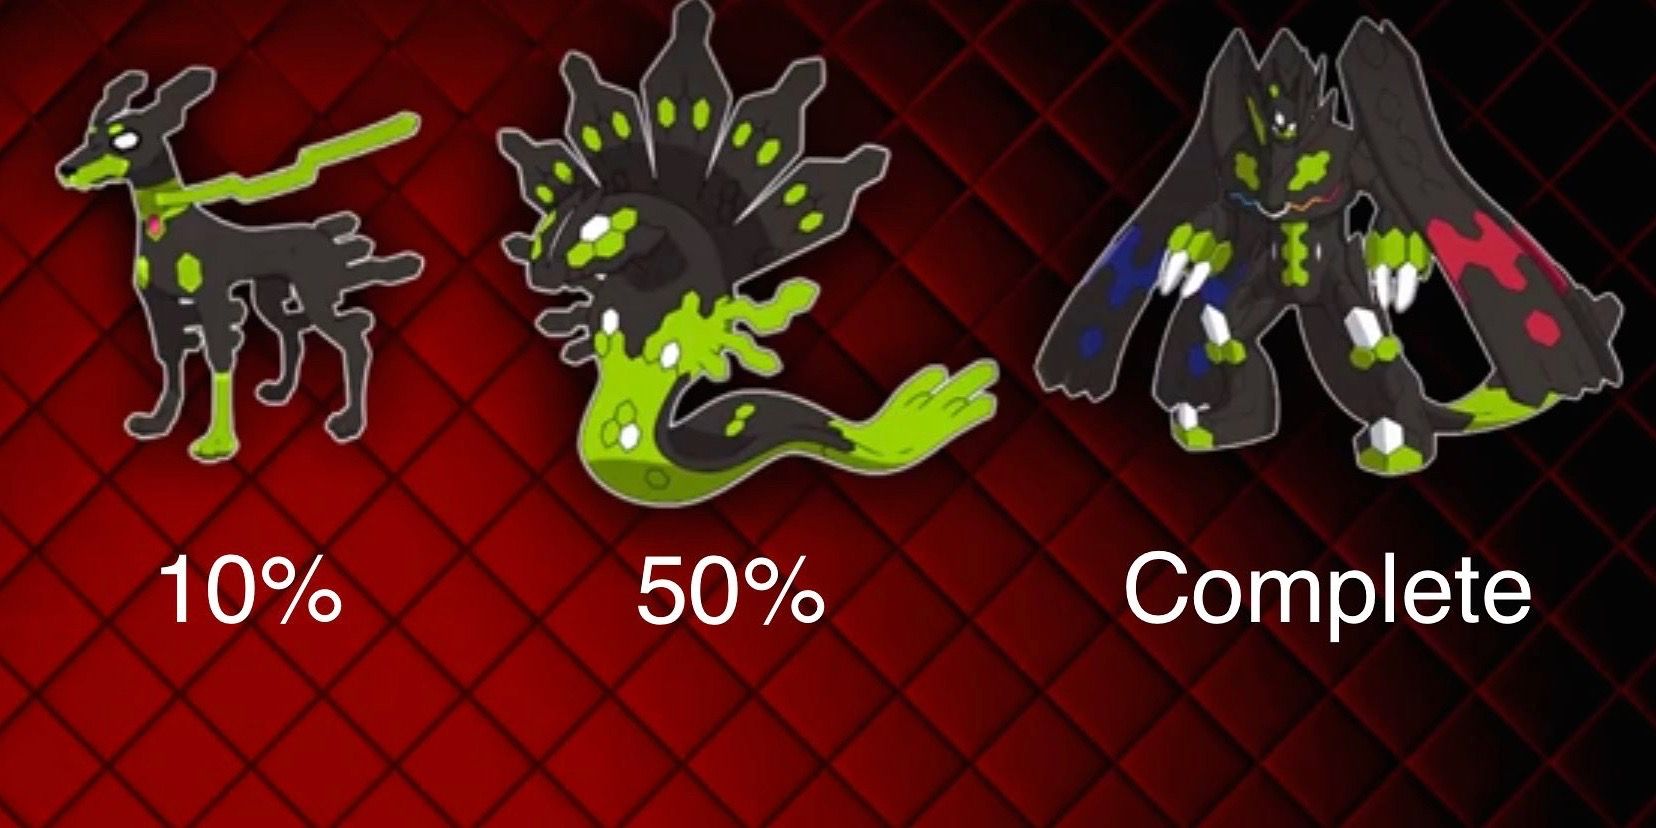 Zygarde appears in its various forms in Pokemon